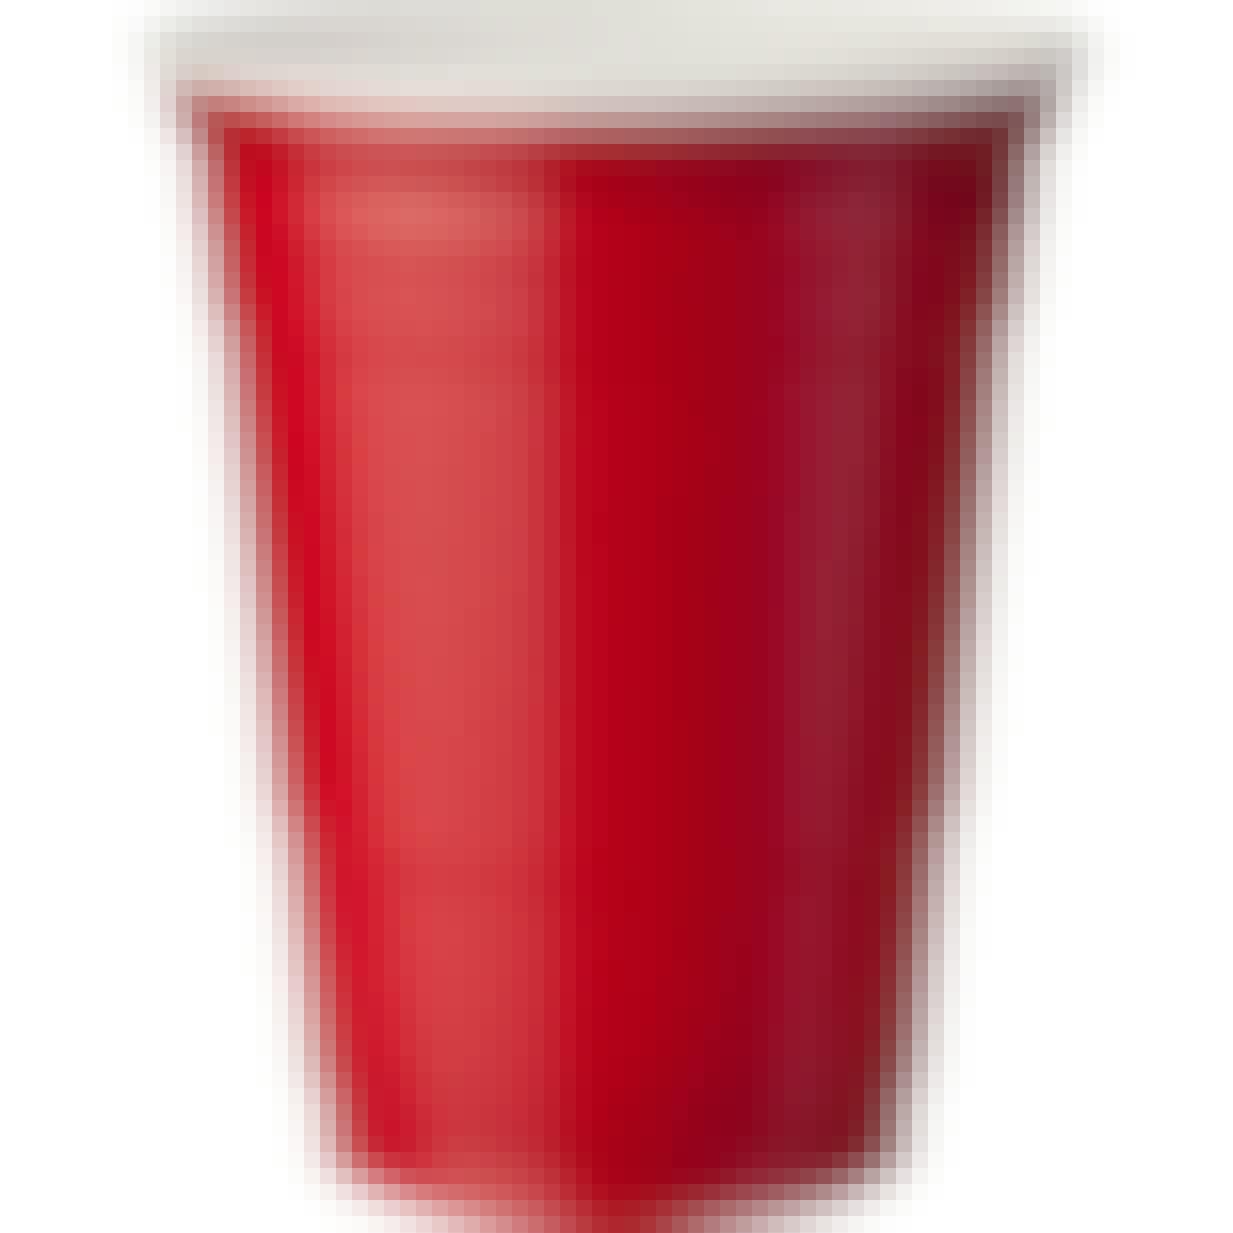 Solo Cups